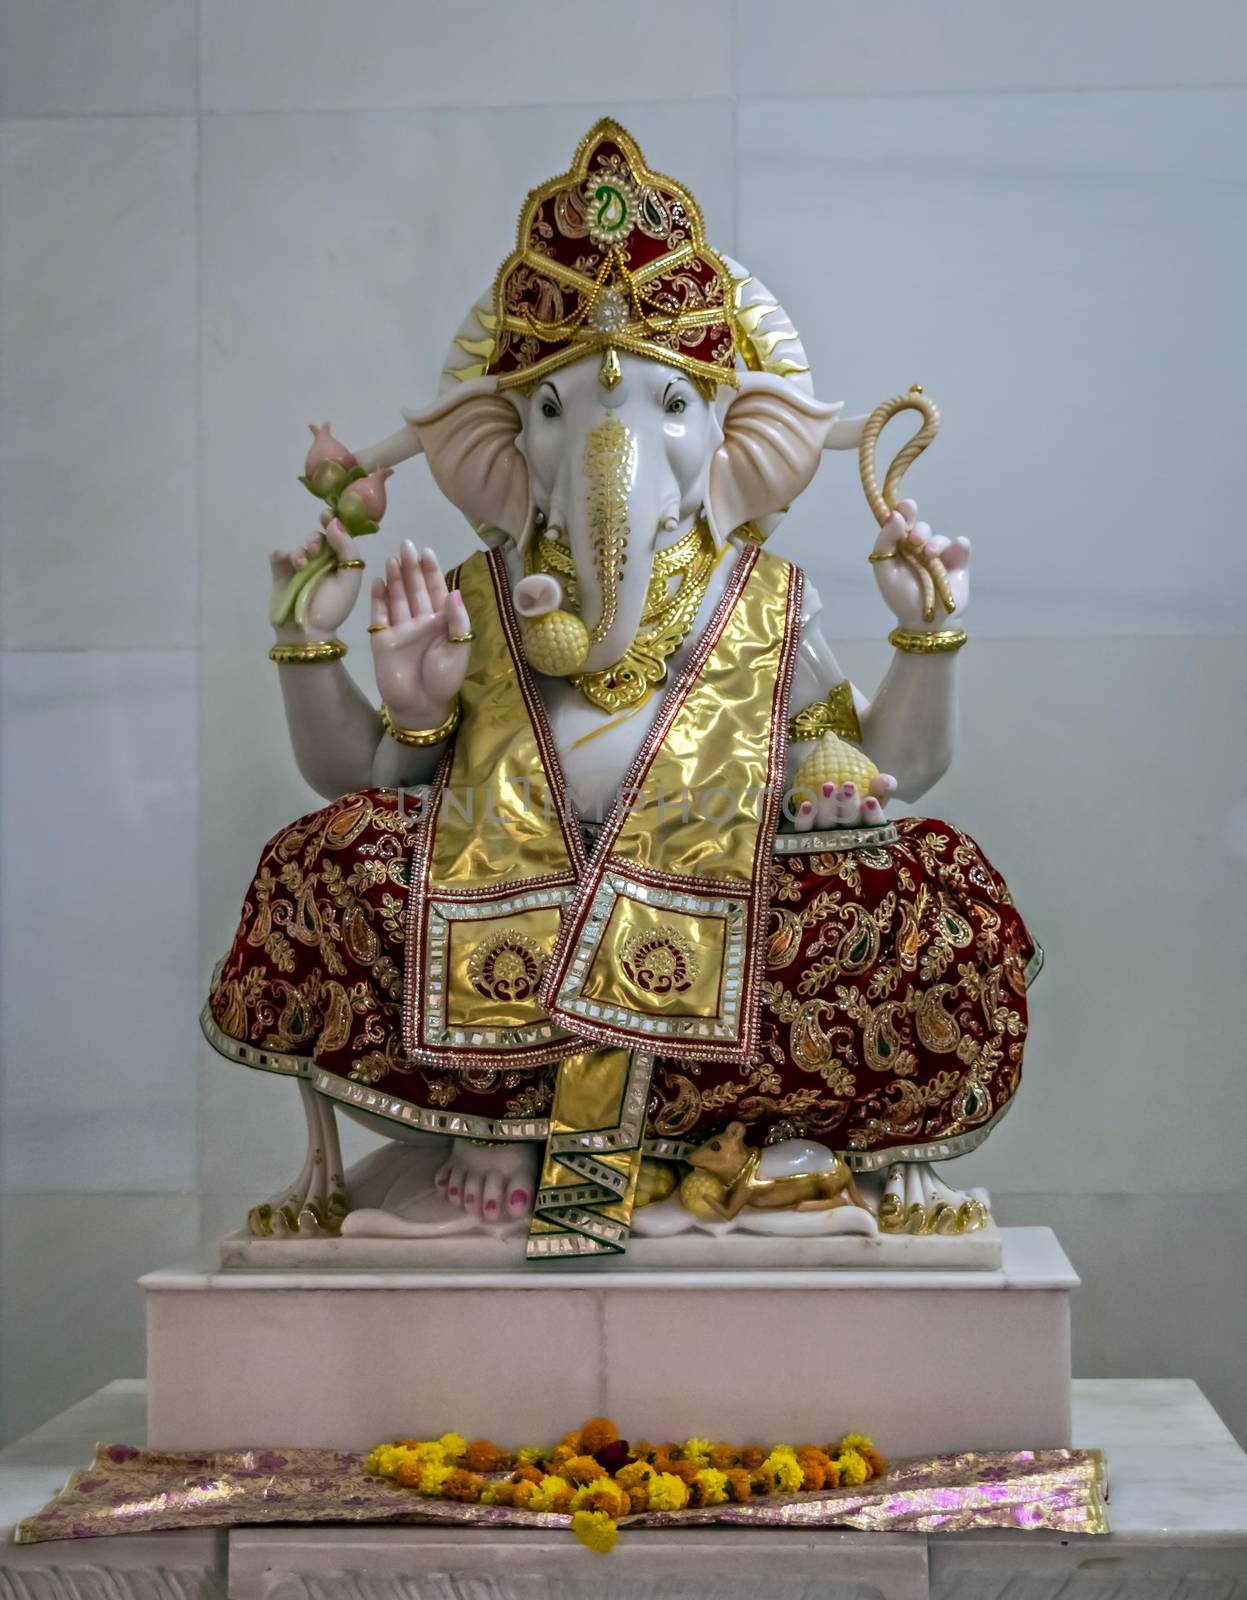 Nicely carved and decorated isolated idol of Hindu God Ganesha in a temple at Somnath, Gujrat, India. by lalam